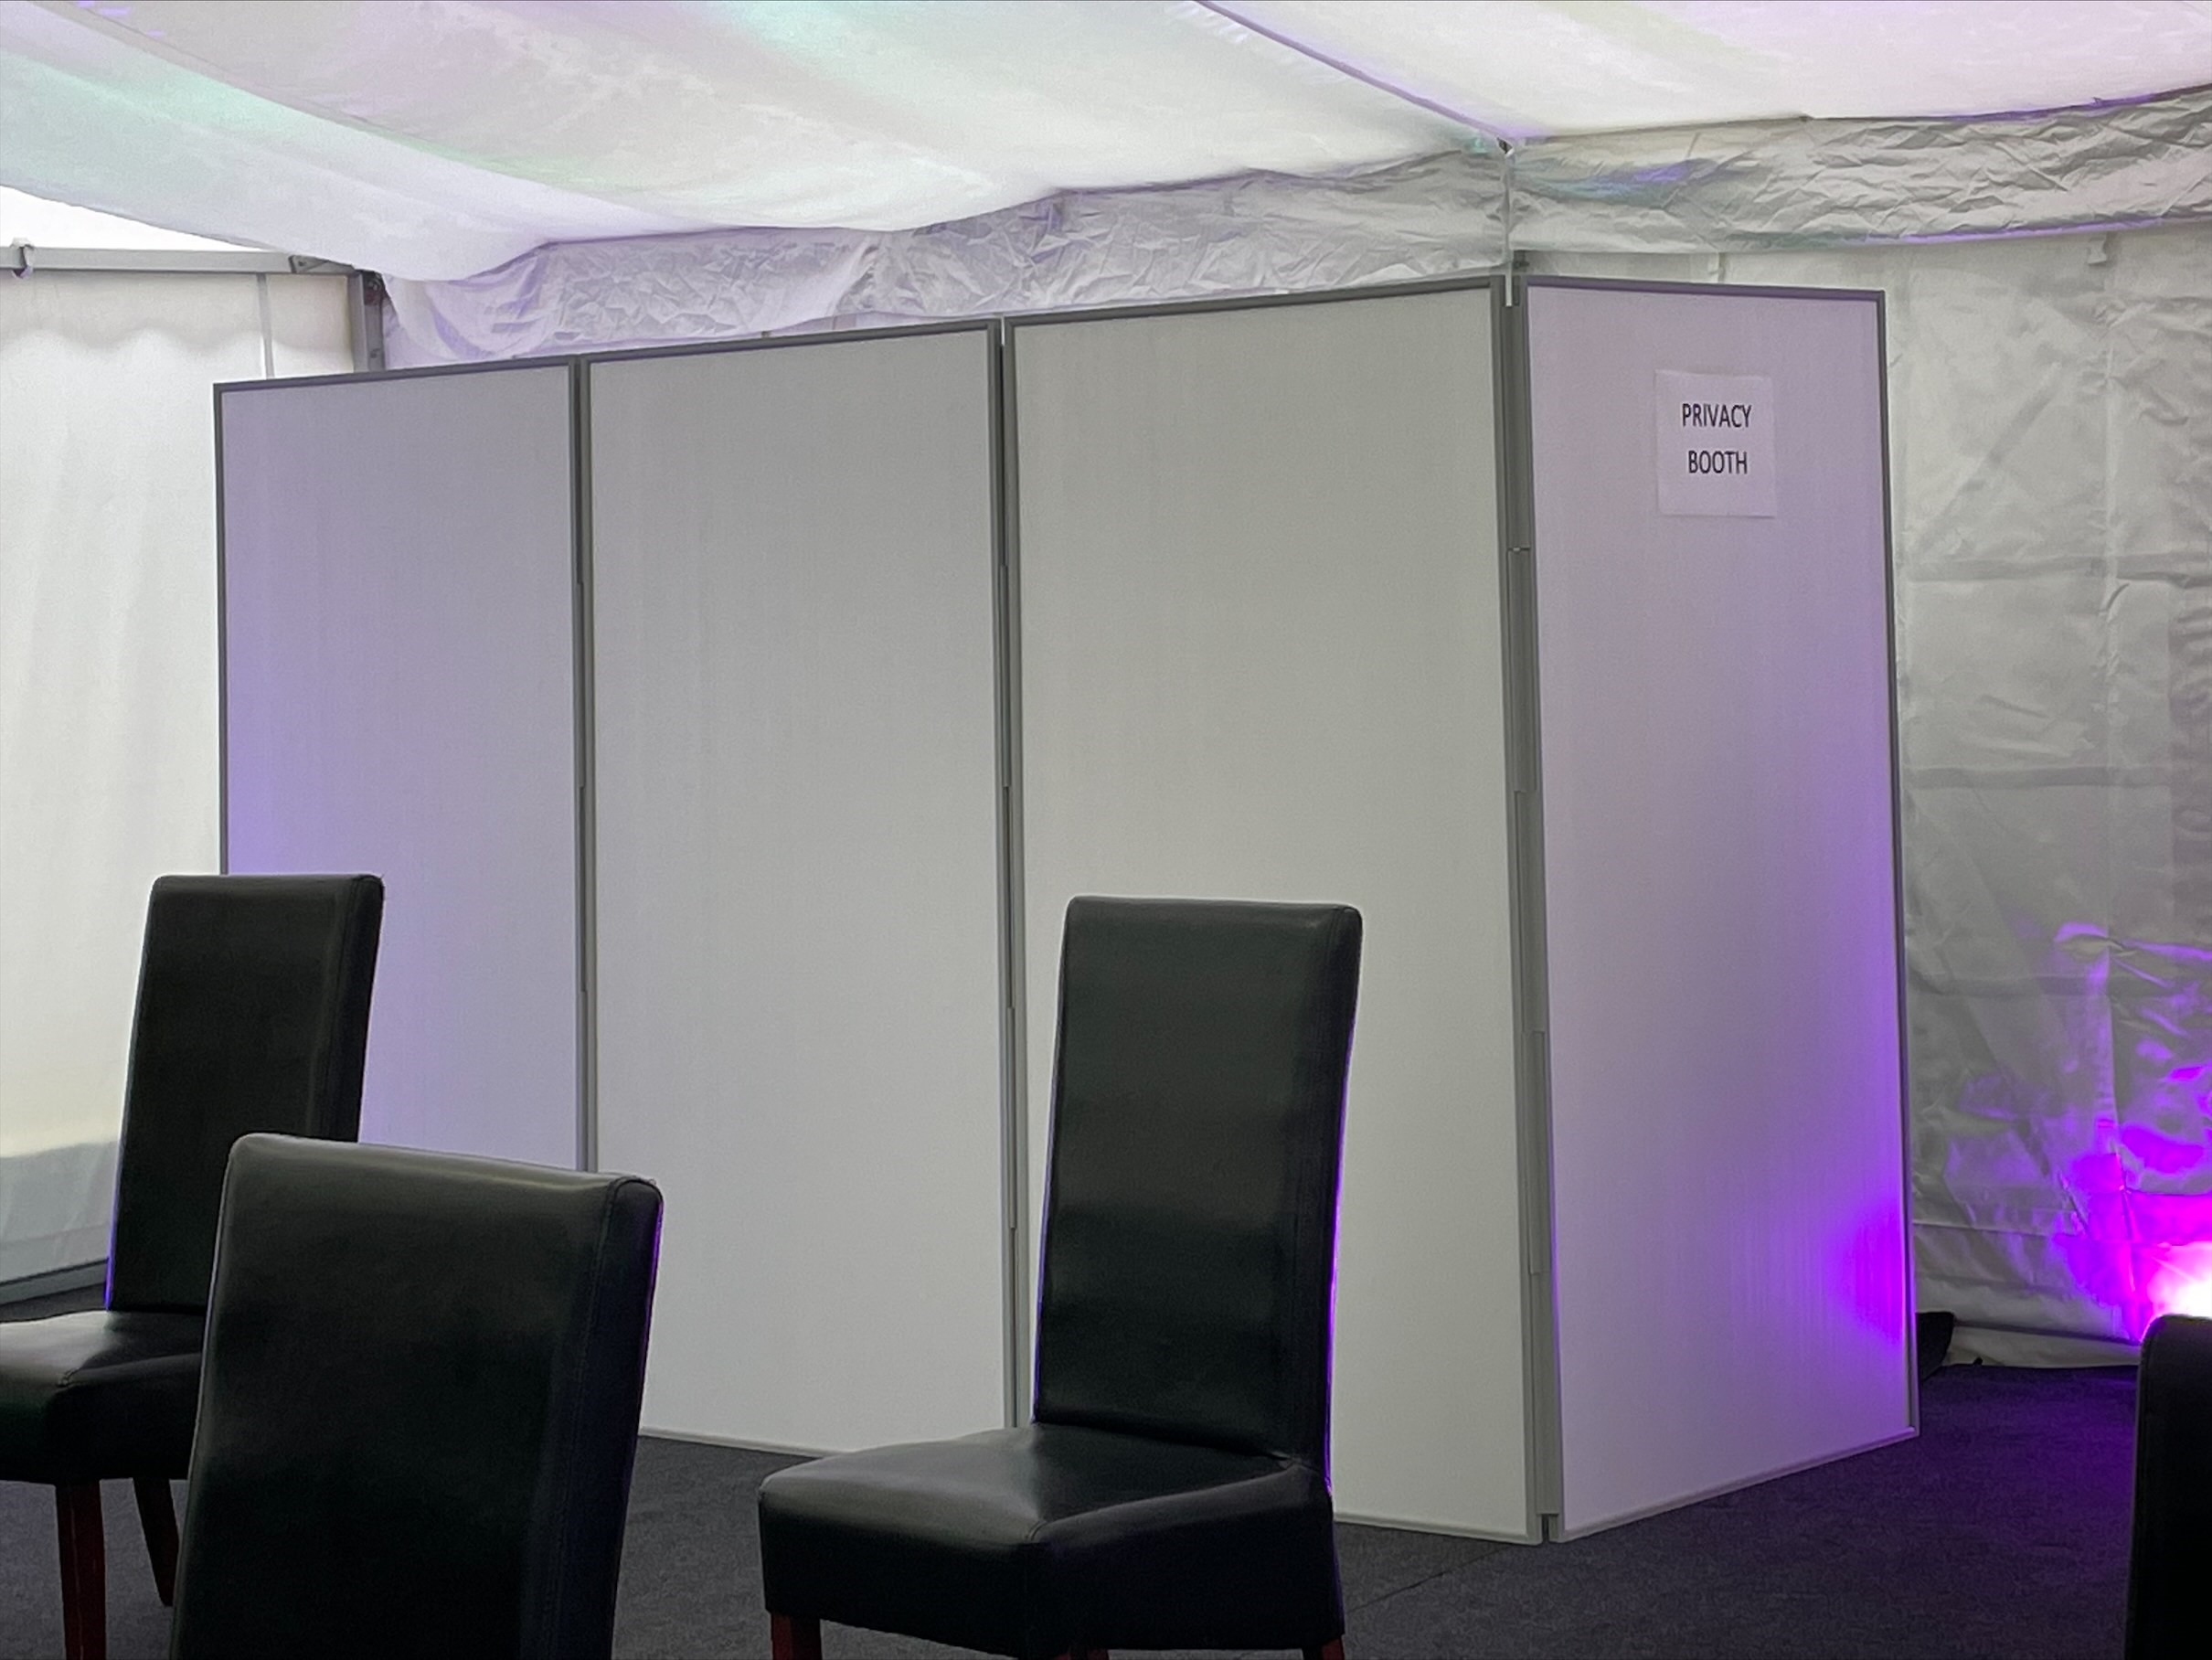 Privacy booth 